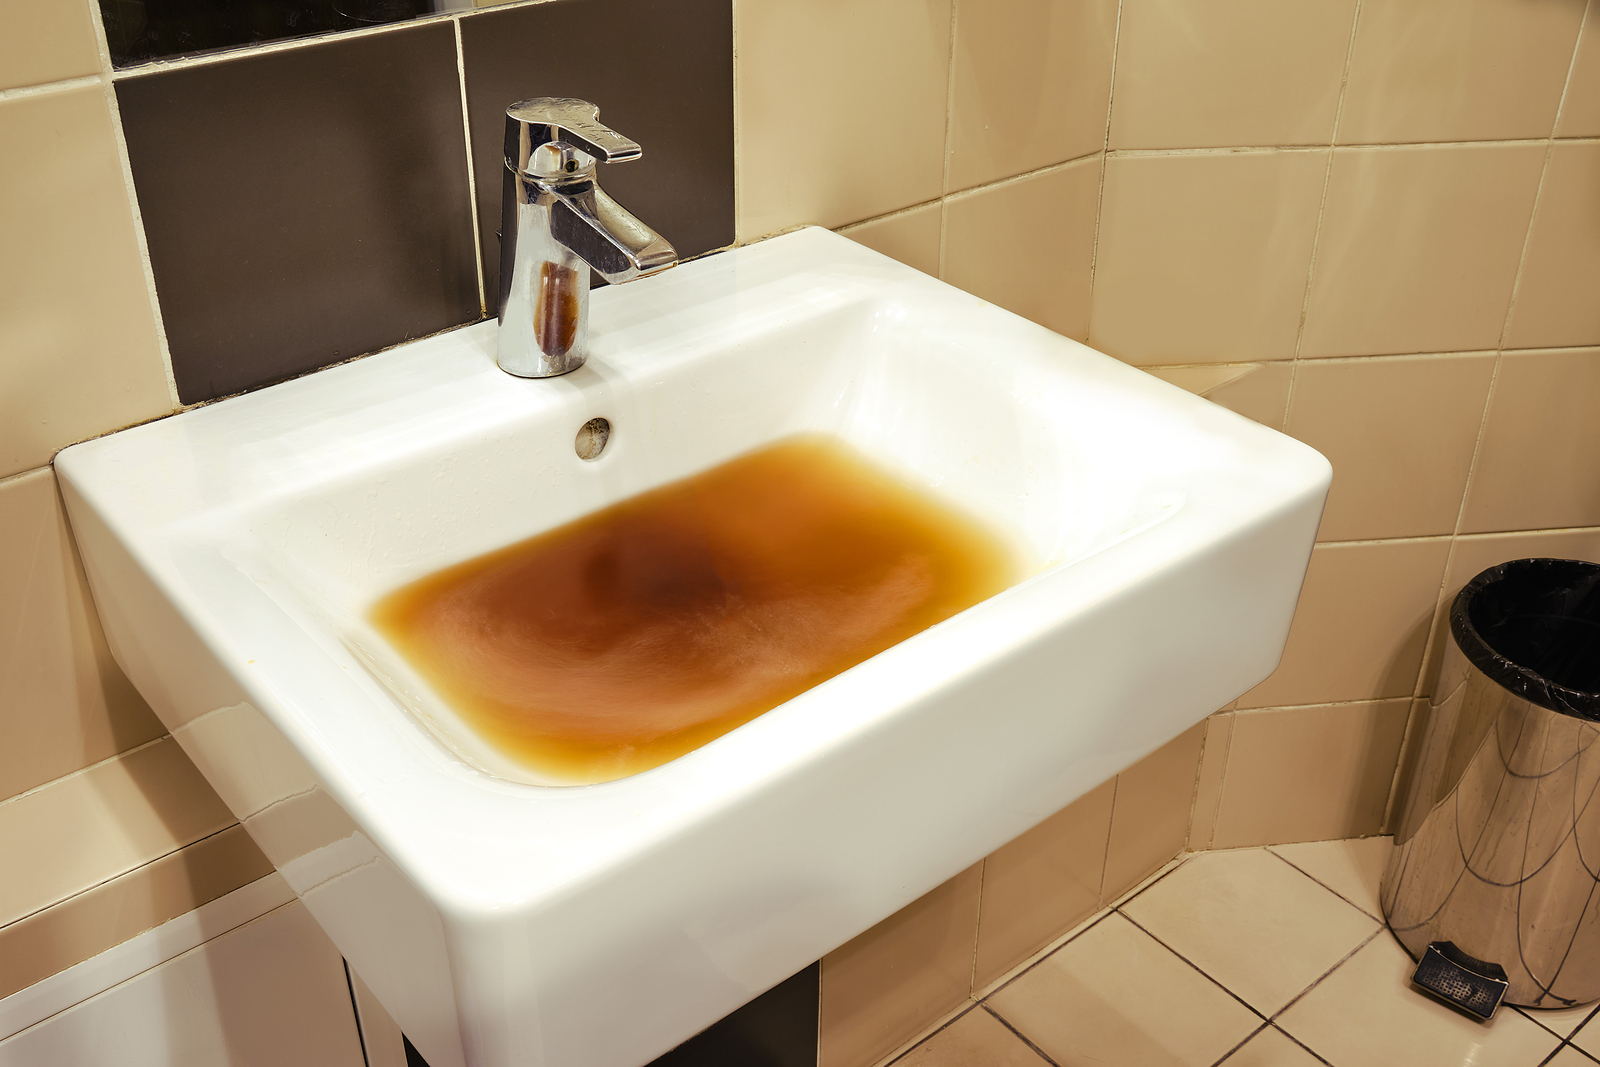 https://www.blockbusters.co.uk/wp-content/uploads/2011/02/bigstock-Clogged-Sink-With-Dirty-Water-404733512.jpg